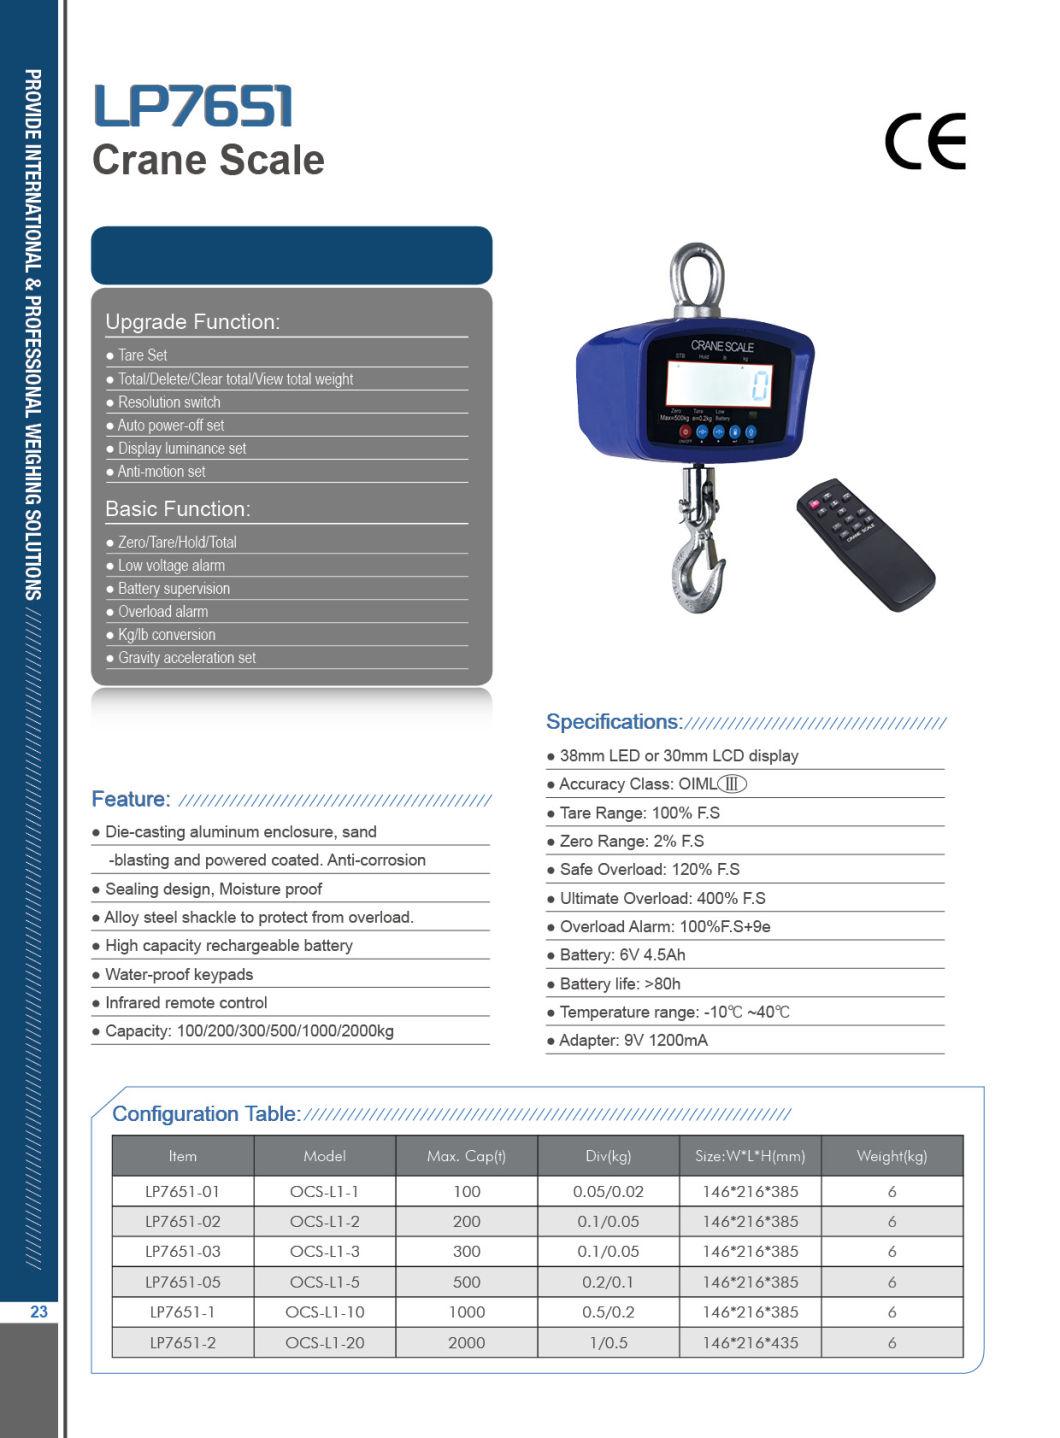 Corrosion-Resisting Excellent Quality Crane Hanging Scale 300 Kg